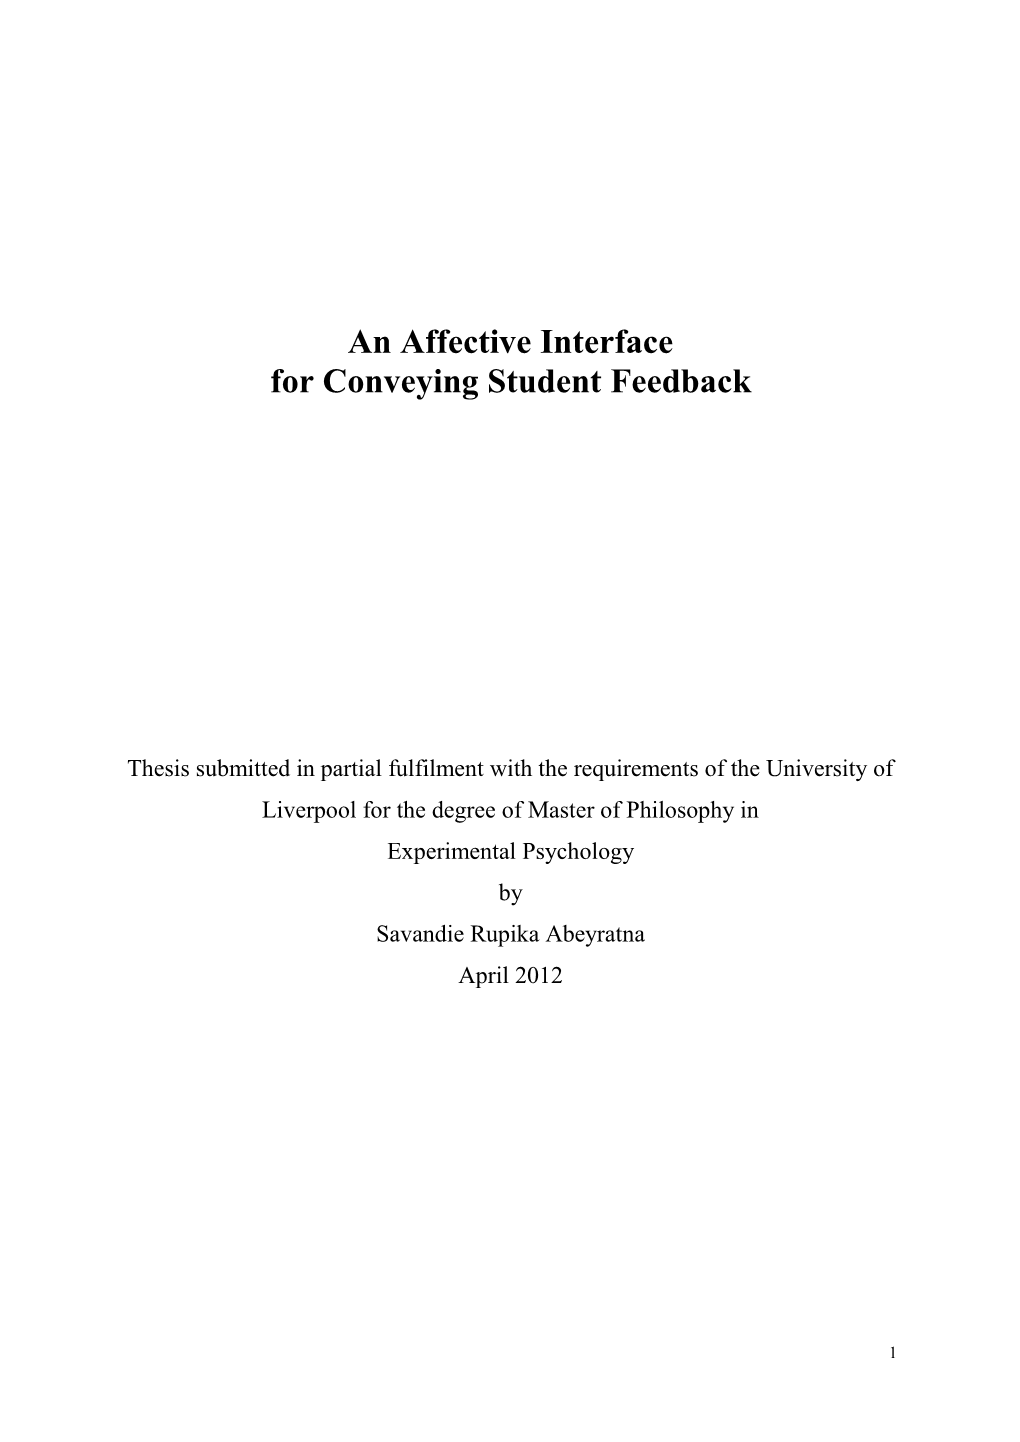 An Affective Interface for Conveying Student Feedback